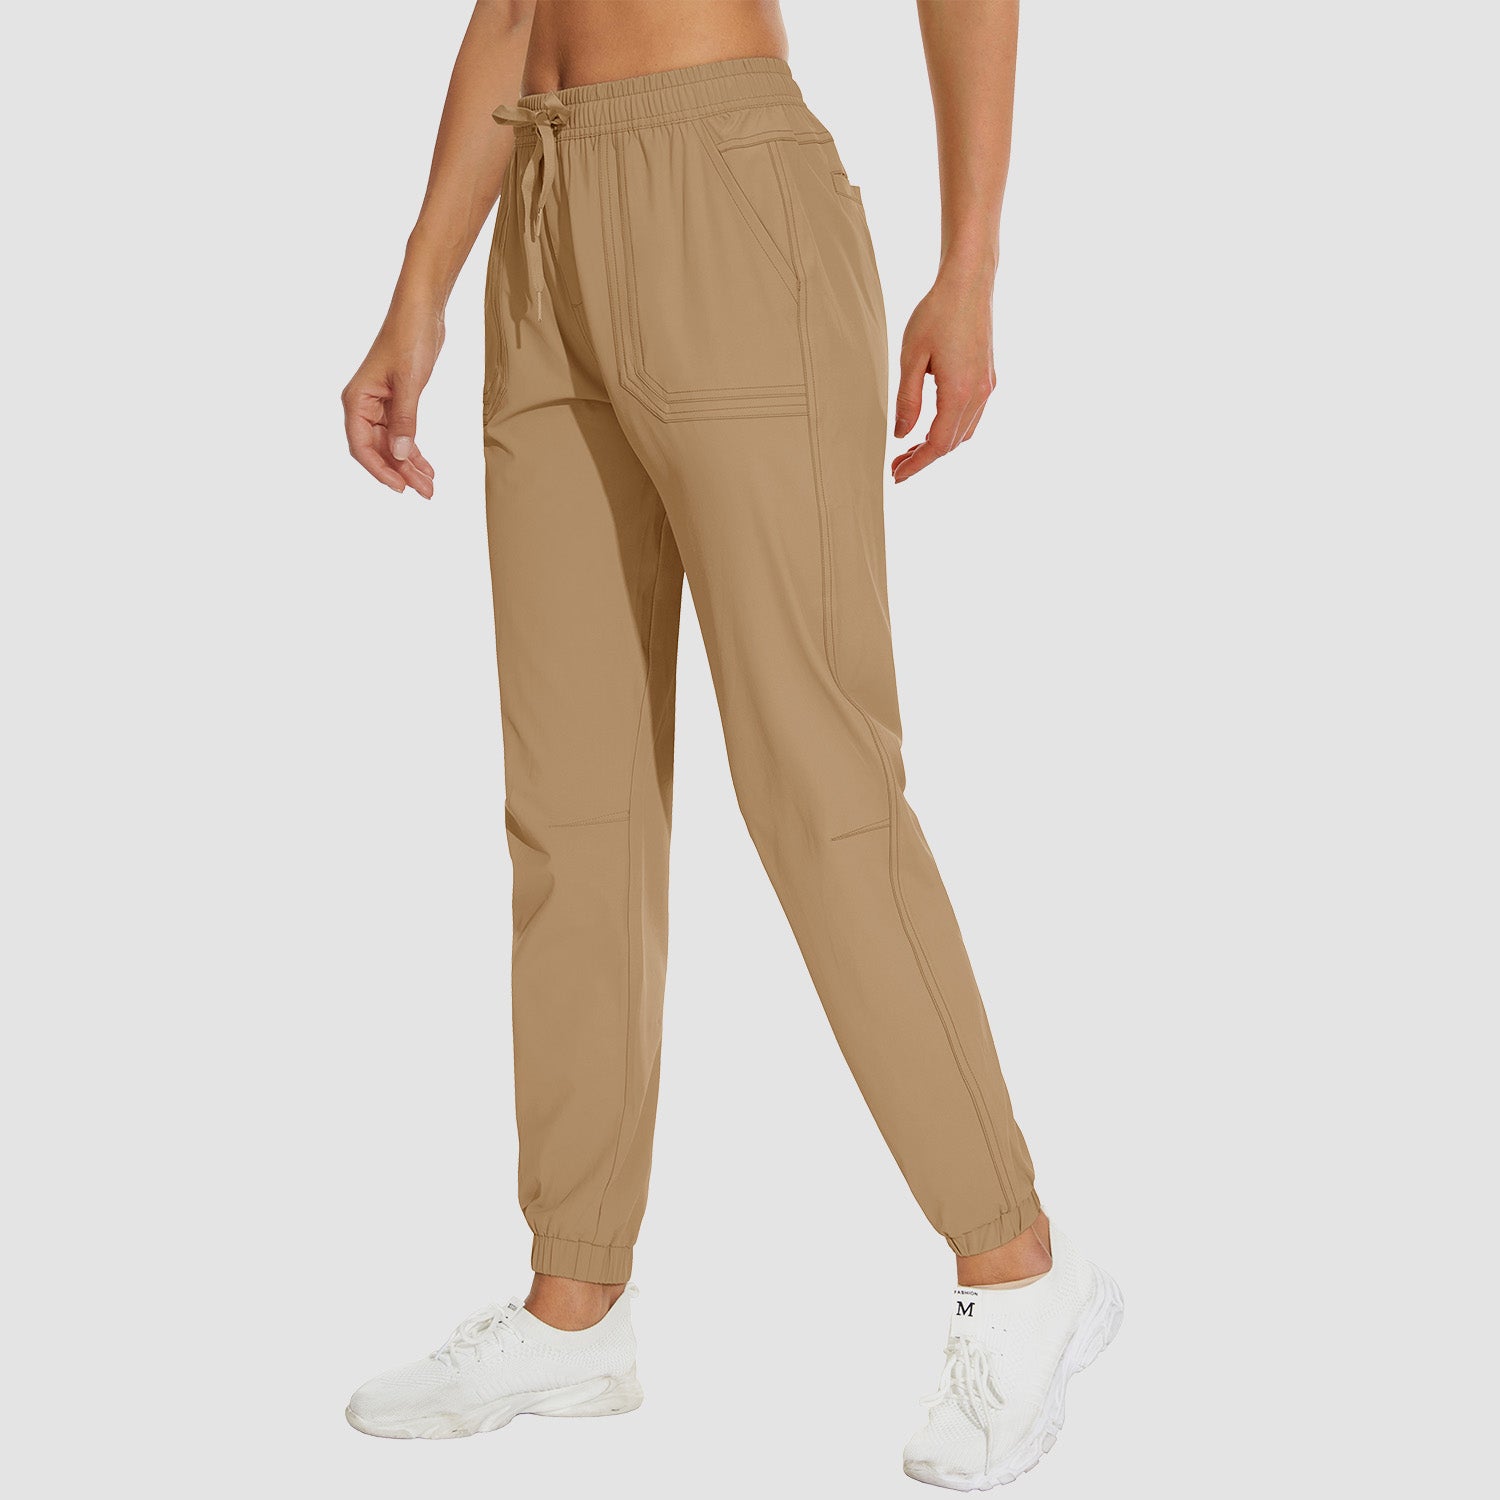 MOCOLY Womens Hiking Cargo Pants Quick Dry Stretch India | Ubuy